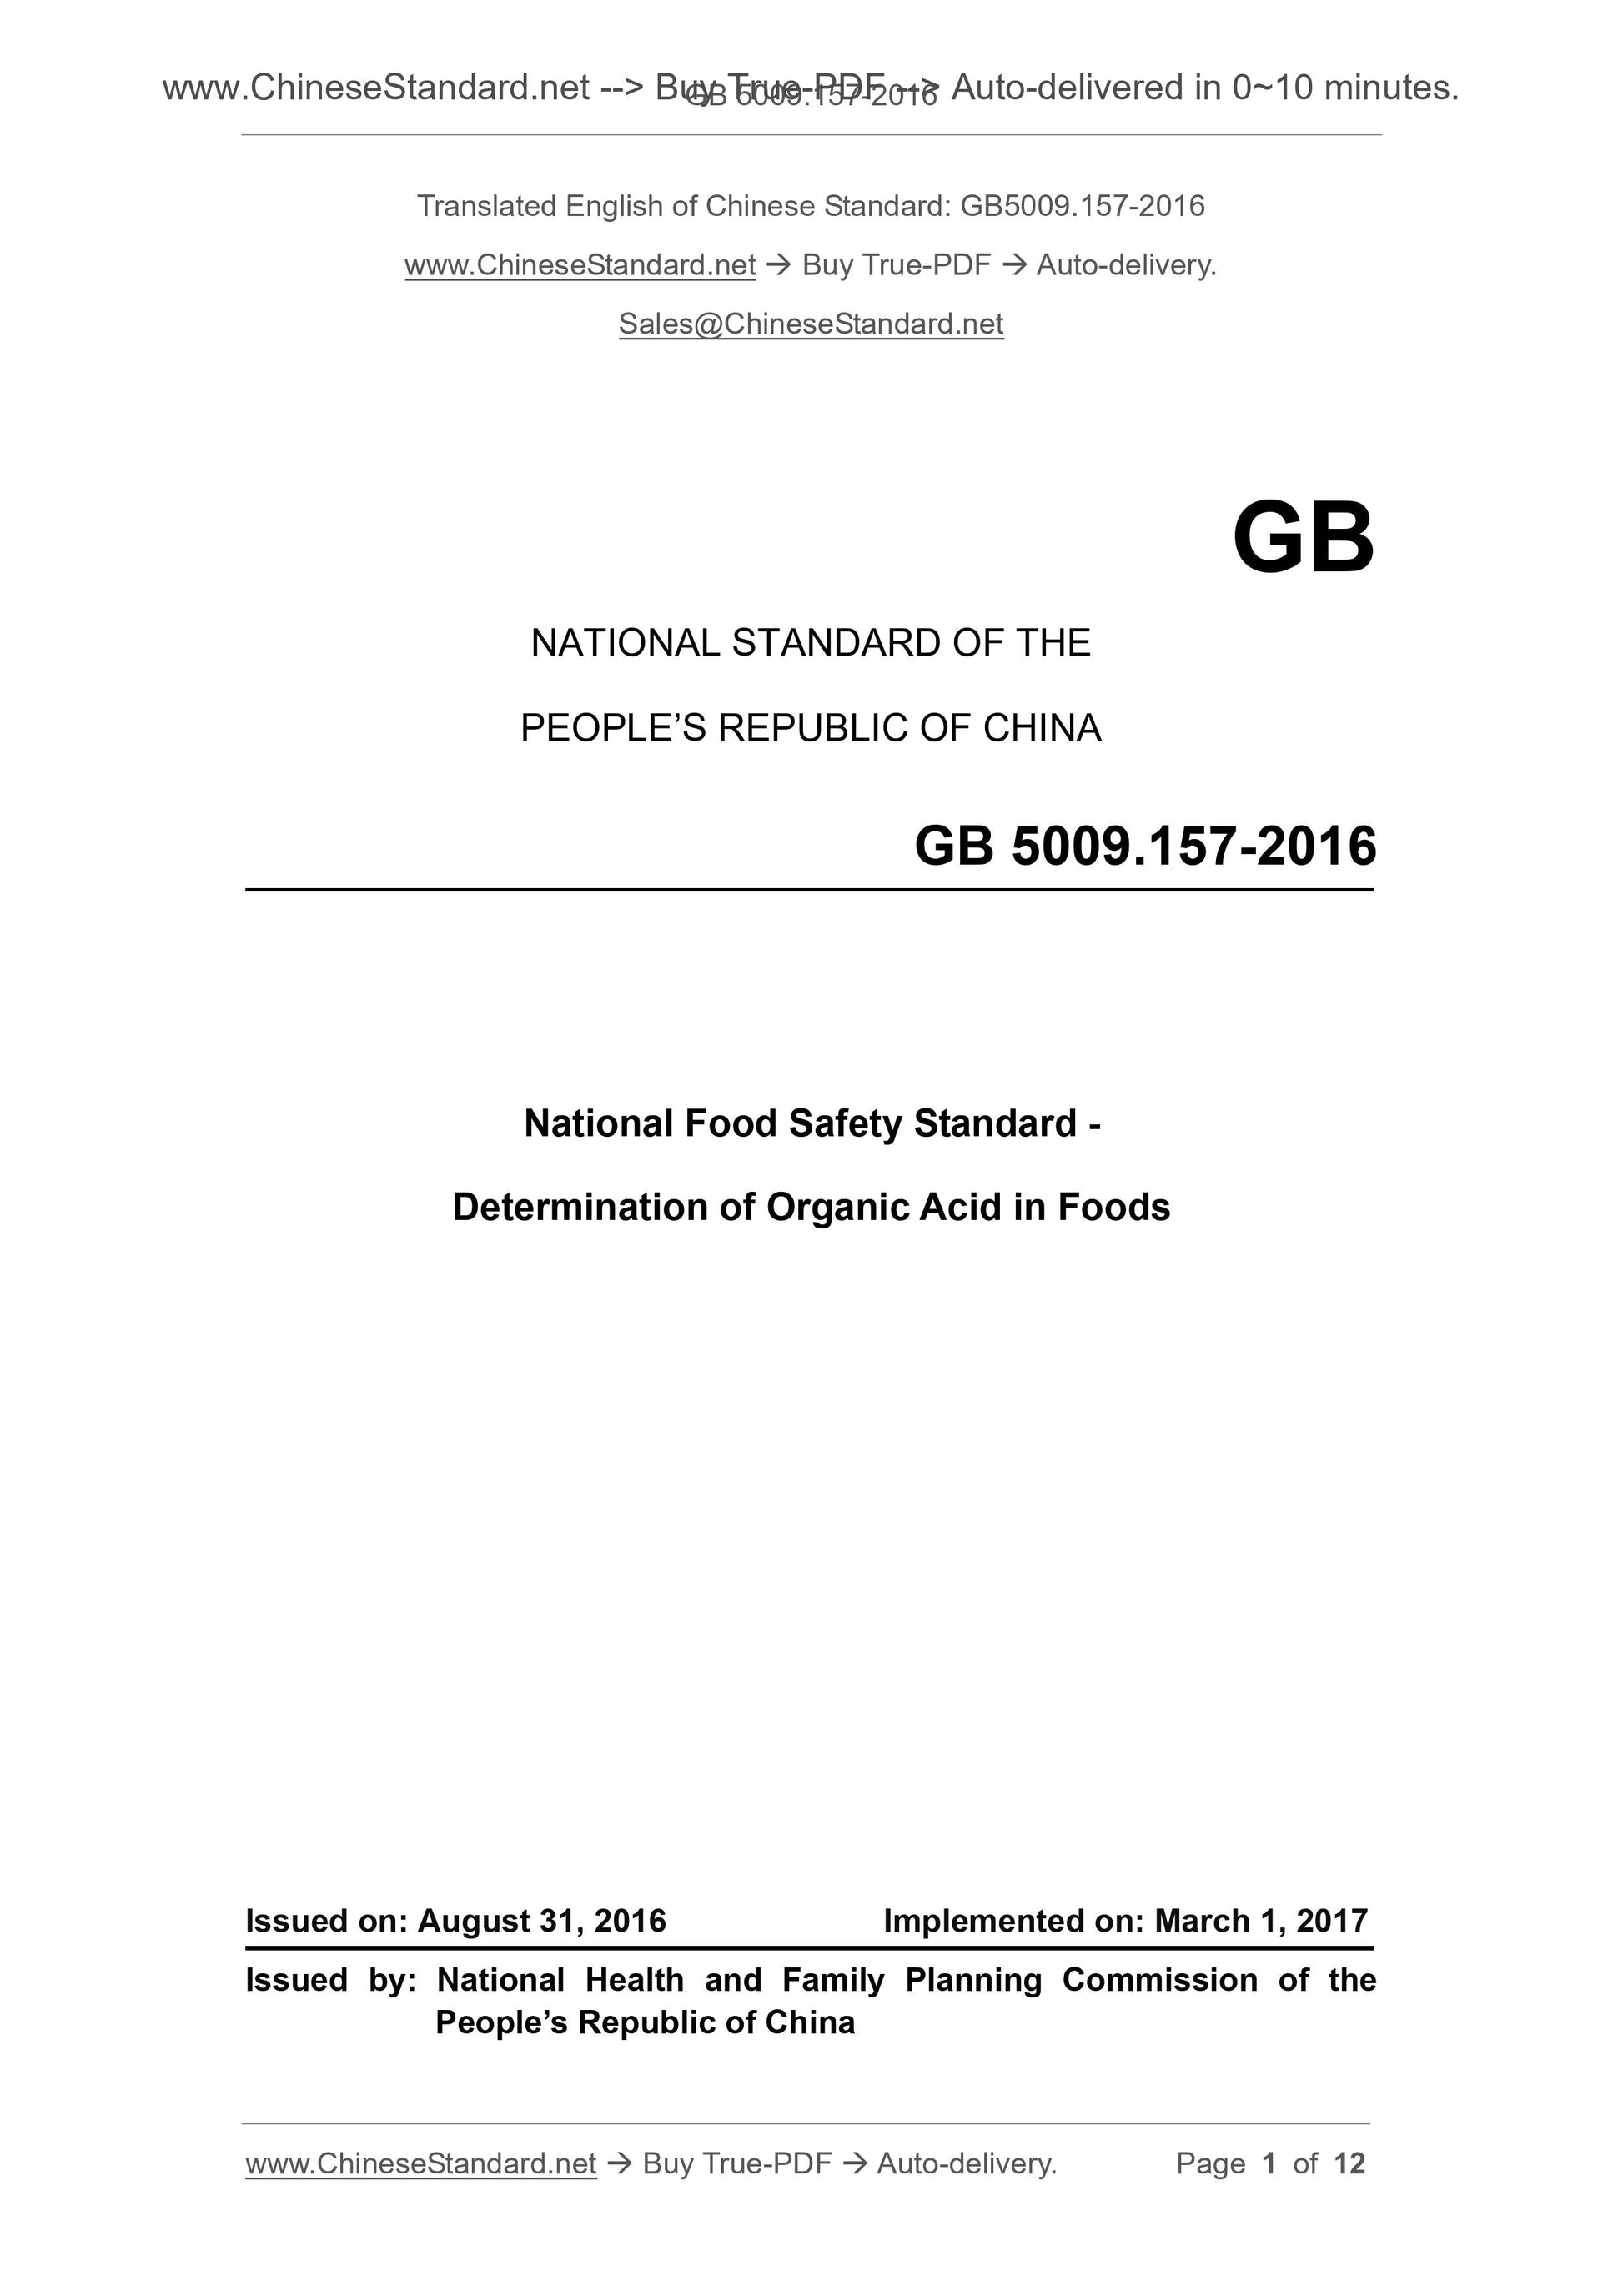 GB 5009.157-2016 Page 1